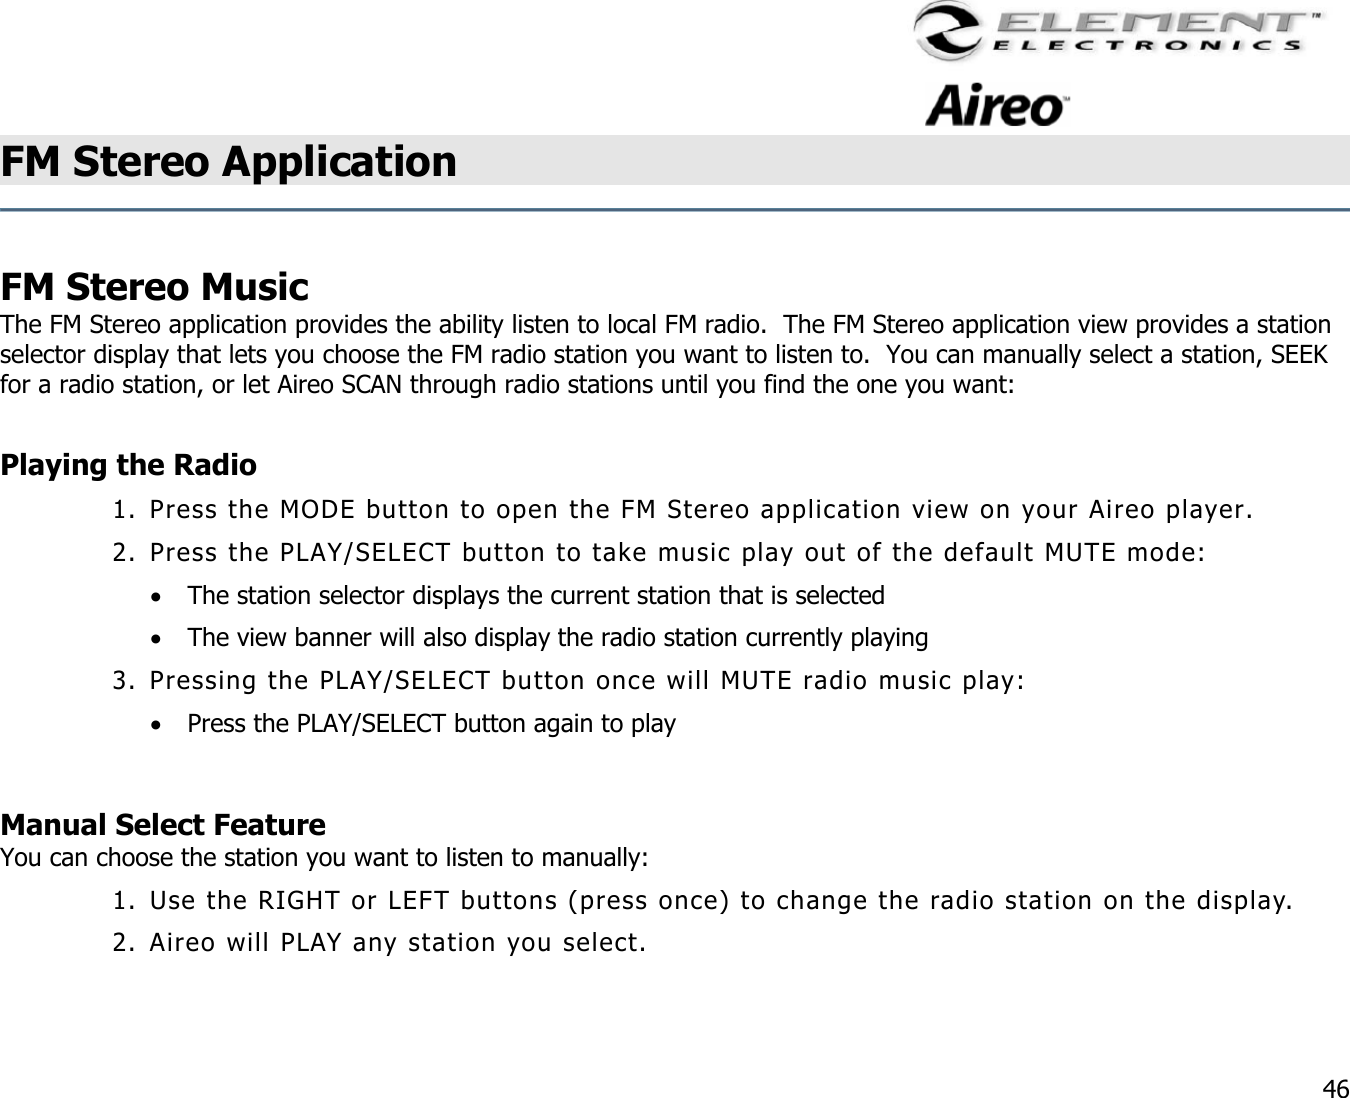                                                                                    46 FM Stereo Application     FM Stereo Music The FM Stereo application provides the ability listen to local FM radio.  The FM Stereo application view provides a station selector display that lets you choose the FM radio station you want to listen to.  You can manually select a station, SEEK for a radio station, or let Aireo SCAN through radio stations until you find the one you want:  Playing the Radio 1. Press the MODE button to open the FM Stereo application view on your Aireo player. 2. Press the PLAY/SELECT button to take music play out of the default MUTE mode: •  The station selector displays the current station that is selected •  The view banner will also display the radio station currently playing 3. Pressing the PLAY/SELECT button once will MUTE radio music play: •  Press the PLAY/SELECT button again to play  Manual Select Feature You can choose the station you want to listen to manually: 1. Use the RIGHT or LEFT buttons (press once) to change the radio station on the display. 2. Aireo will PLAY any station you select.  